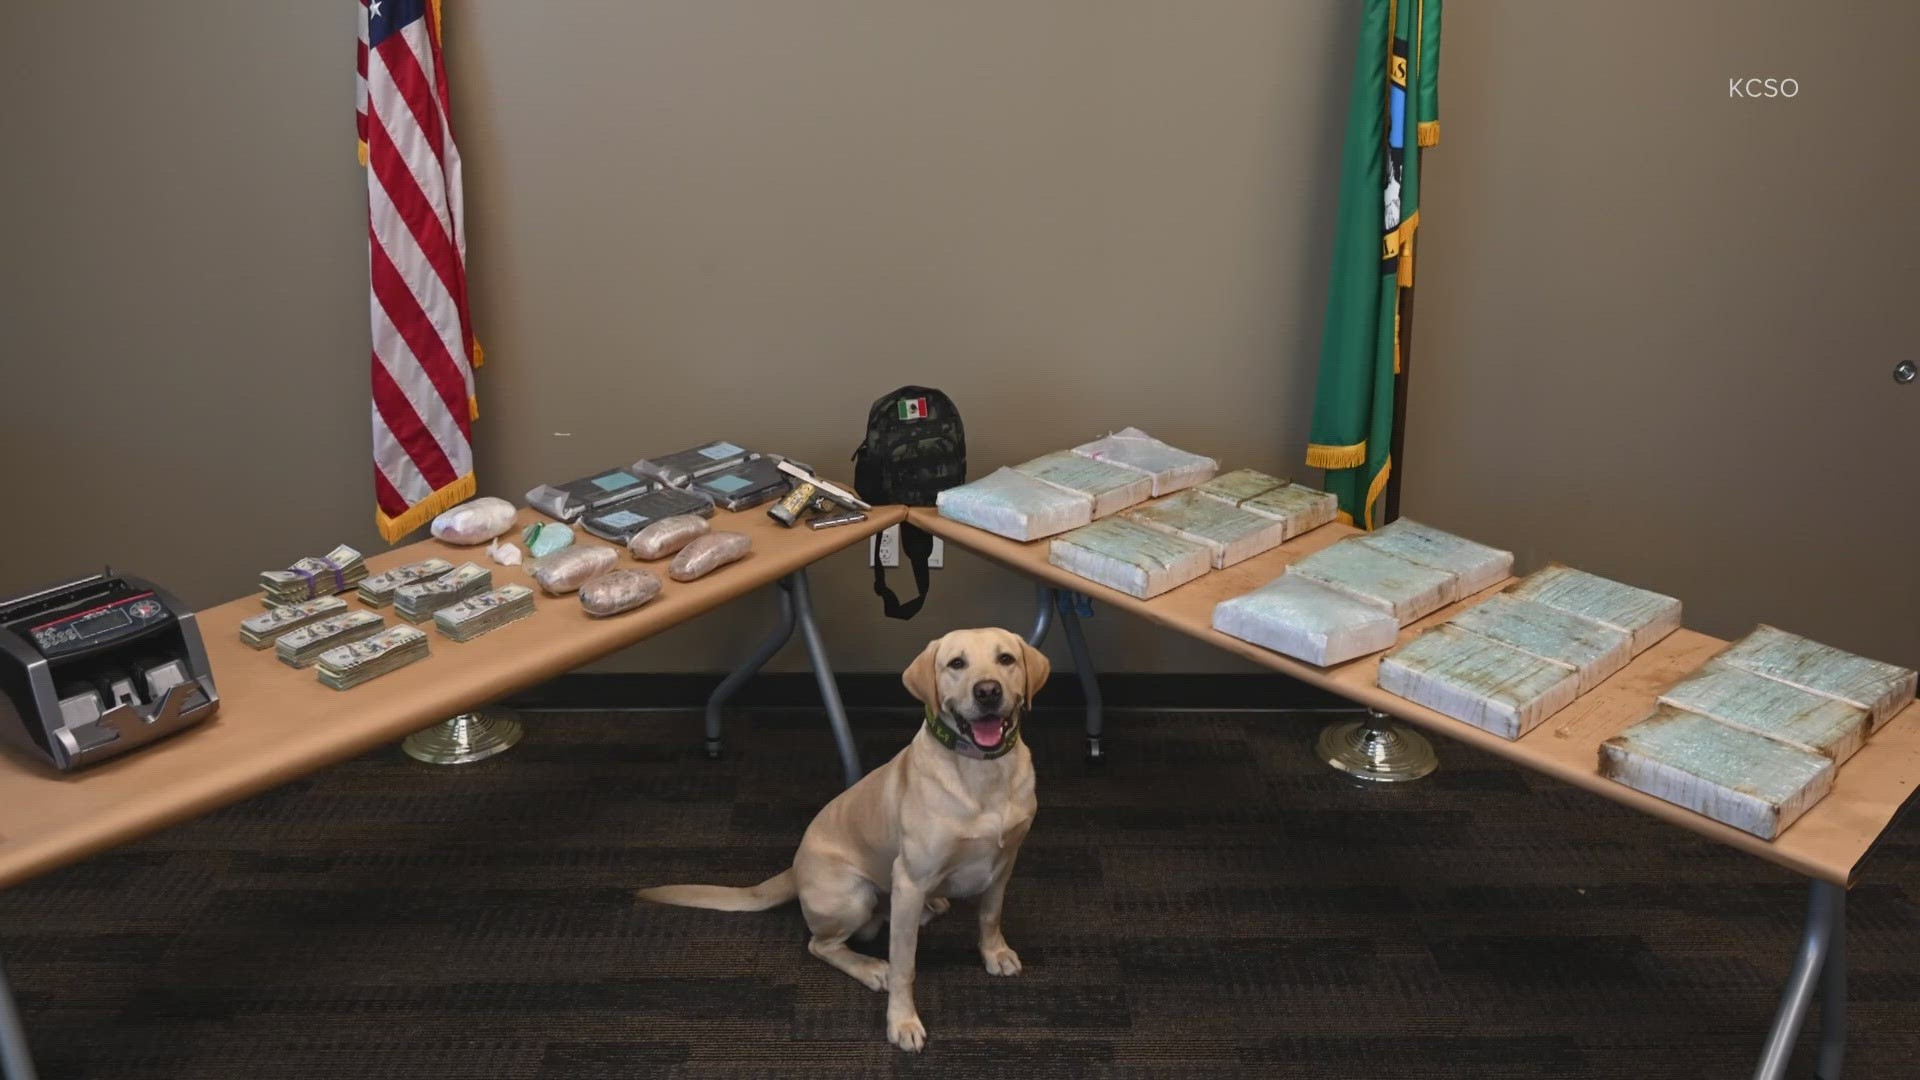 The operation targeted a suspected narcotics trafficker in the cities of Shoreline, Burien, White Center and Seattle.